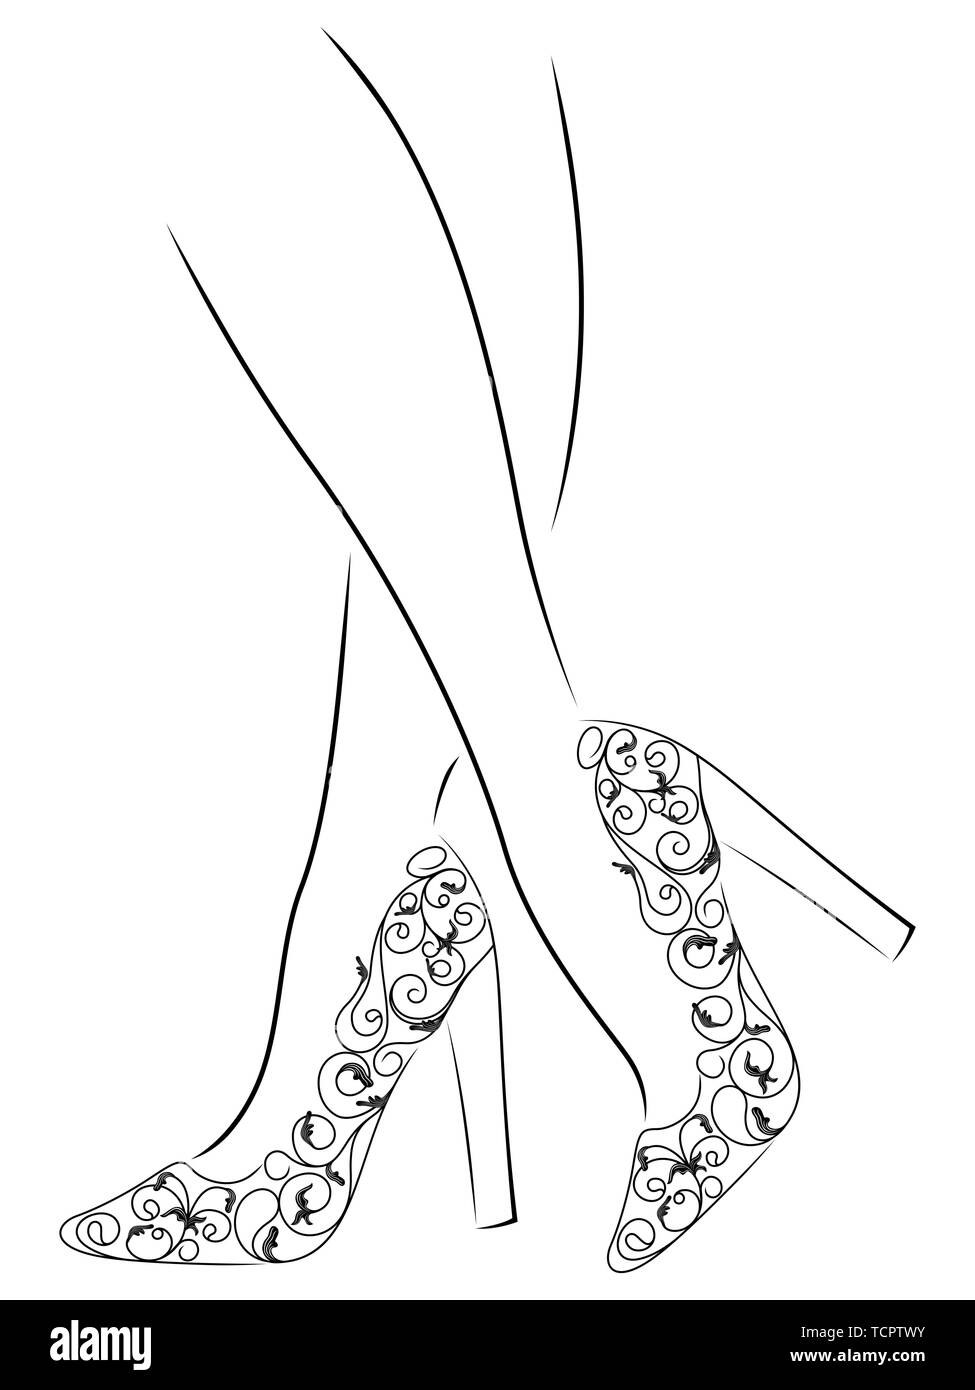 High heel shoes silhouette vector Stock Vector by ©attaphongw 24420785